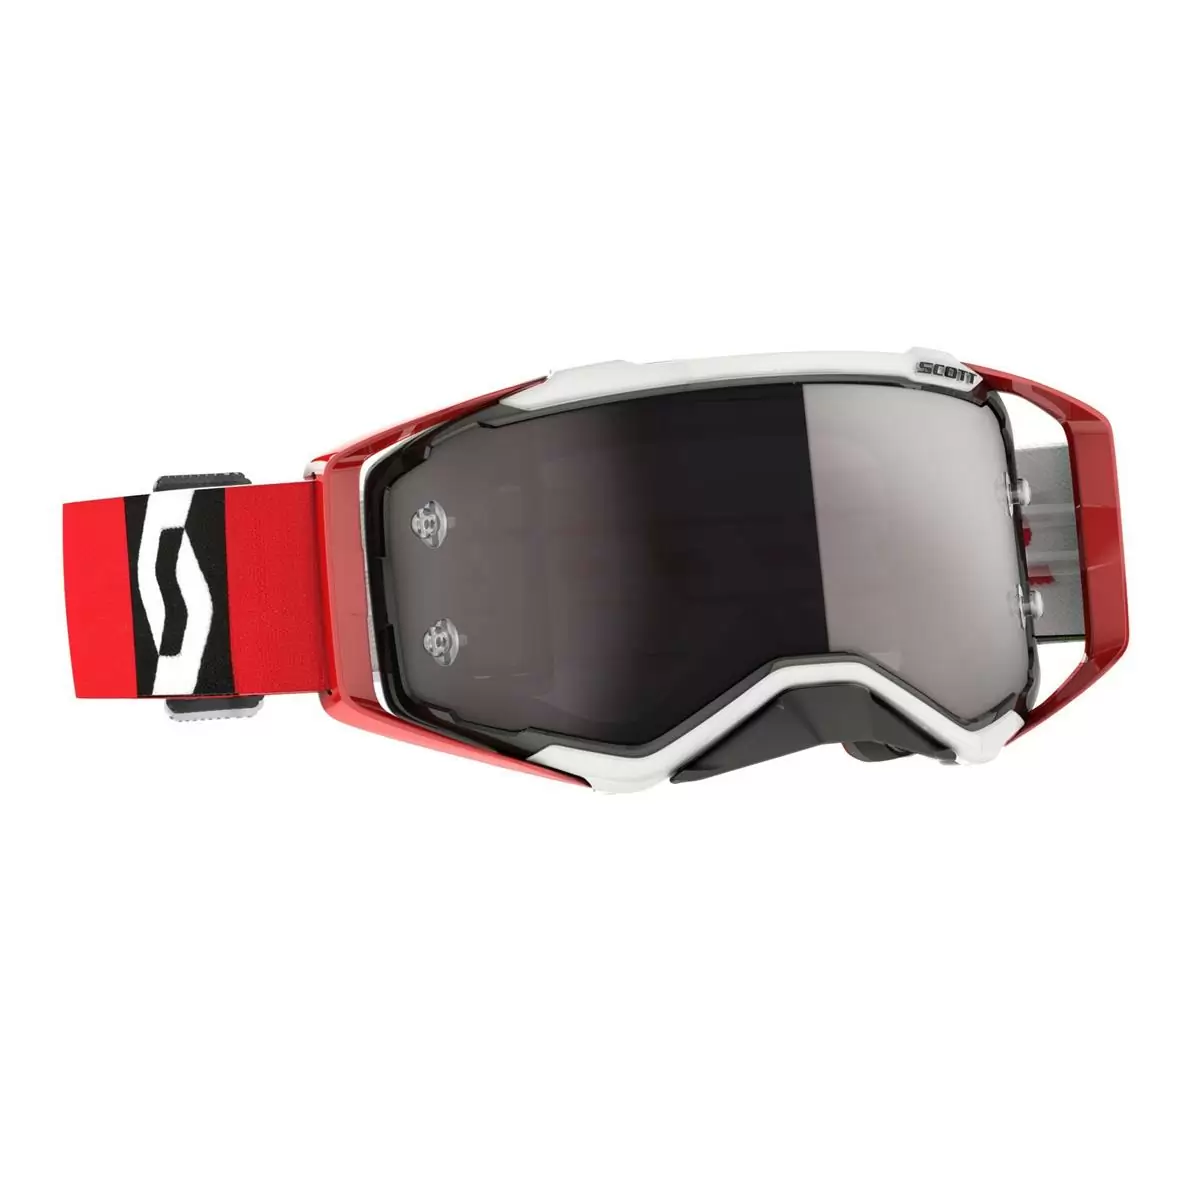 Prospect Mask Black/Red With Chrome Works Silver Lens - image